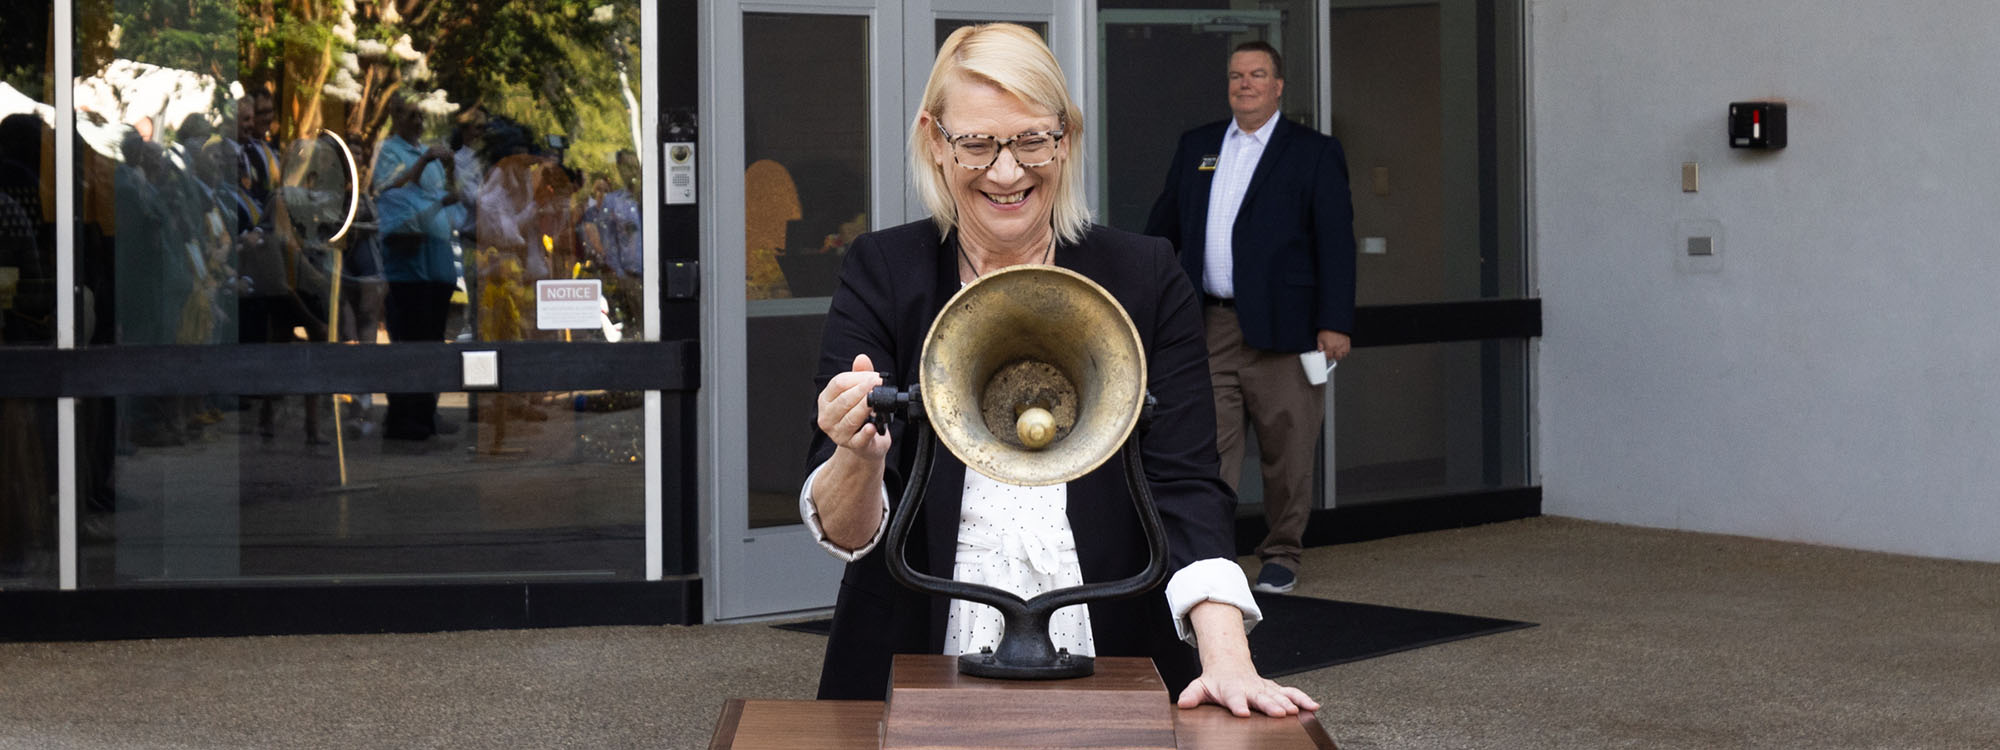 App State Chancellor Sheri Everts steps down after a decade of leadership